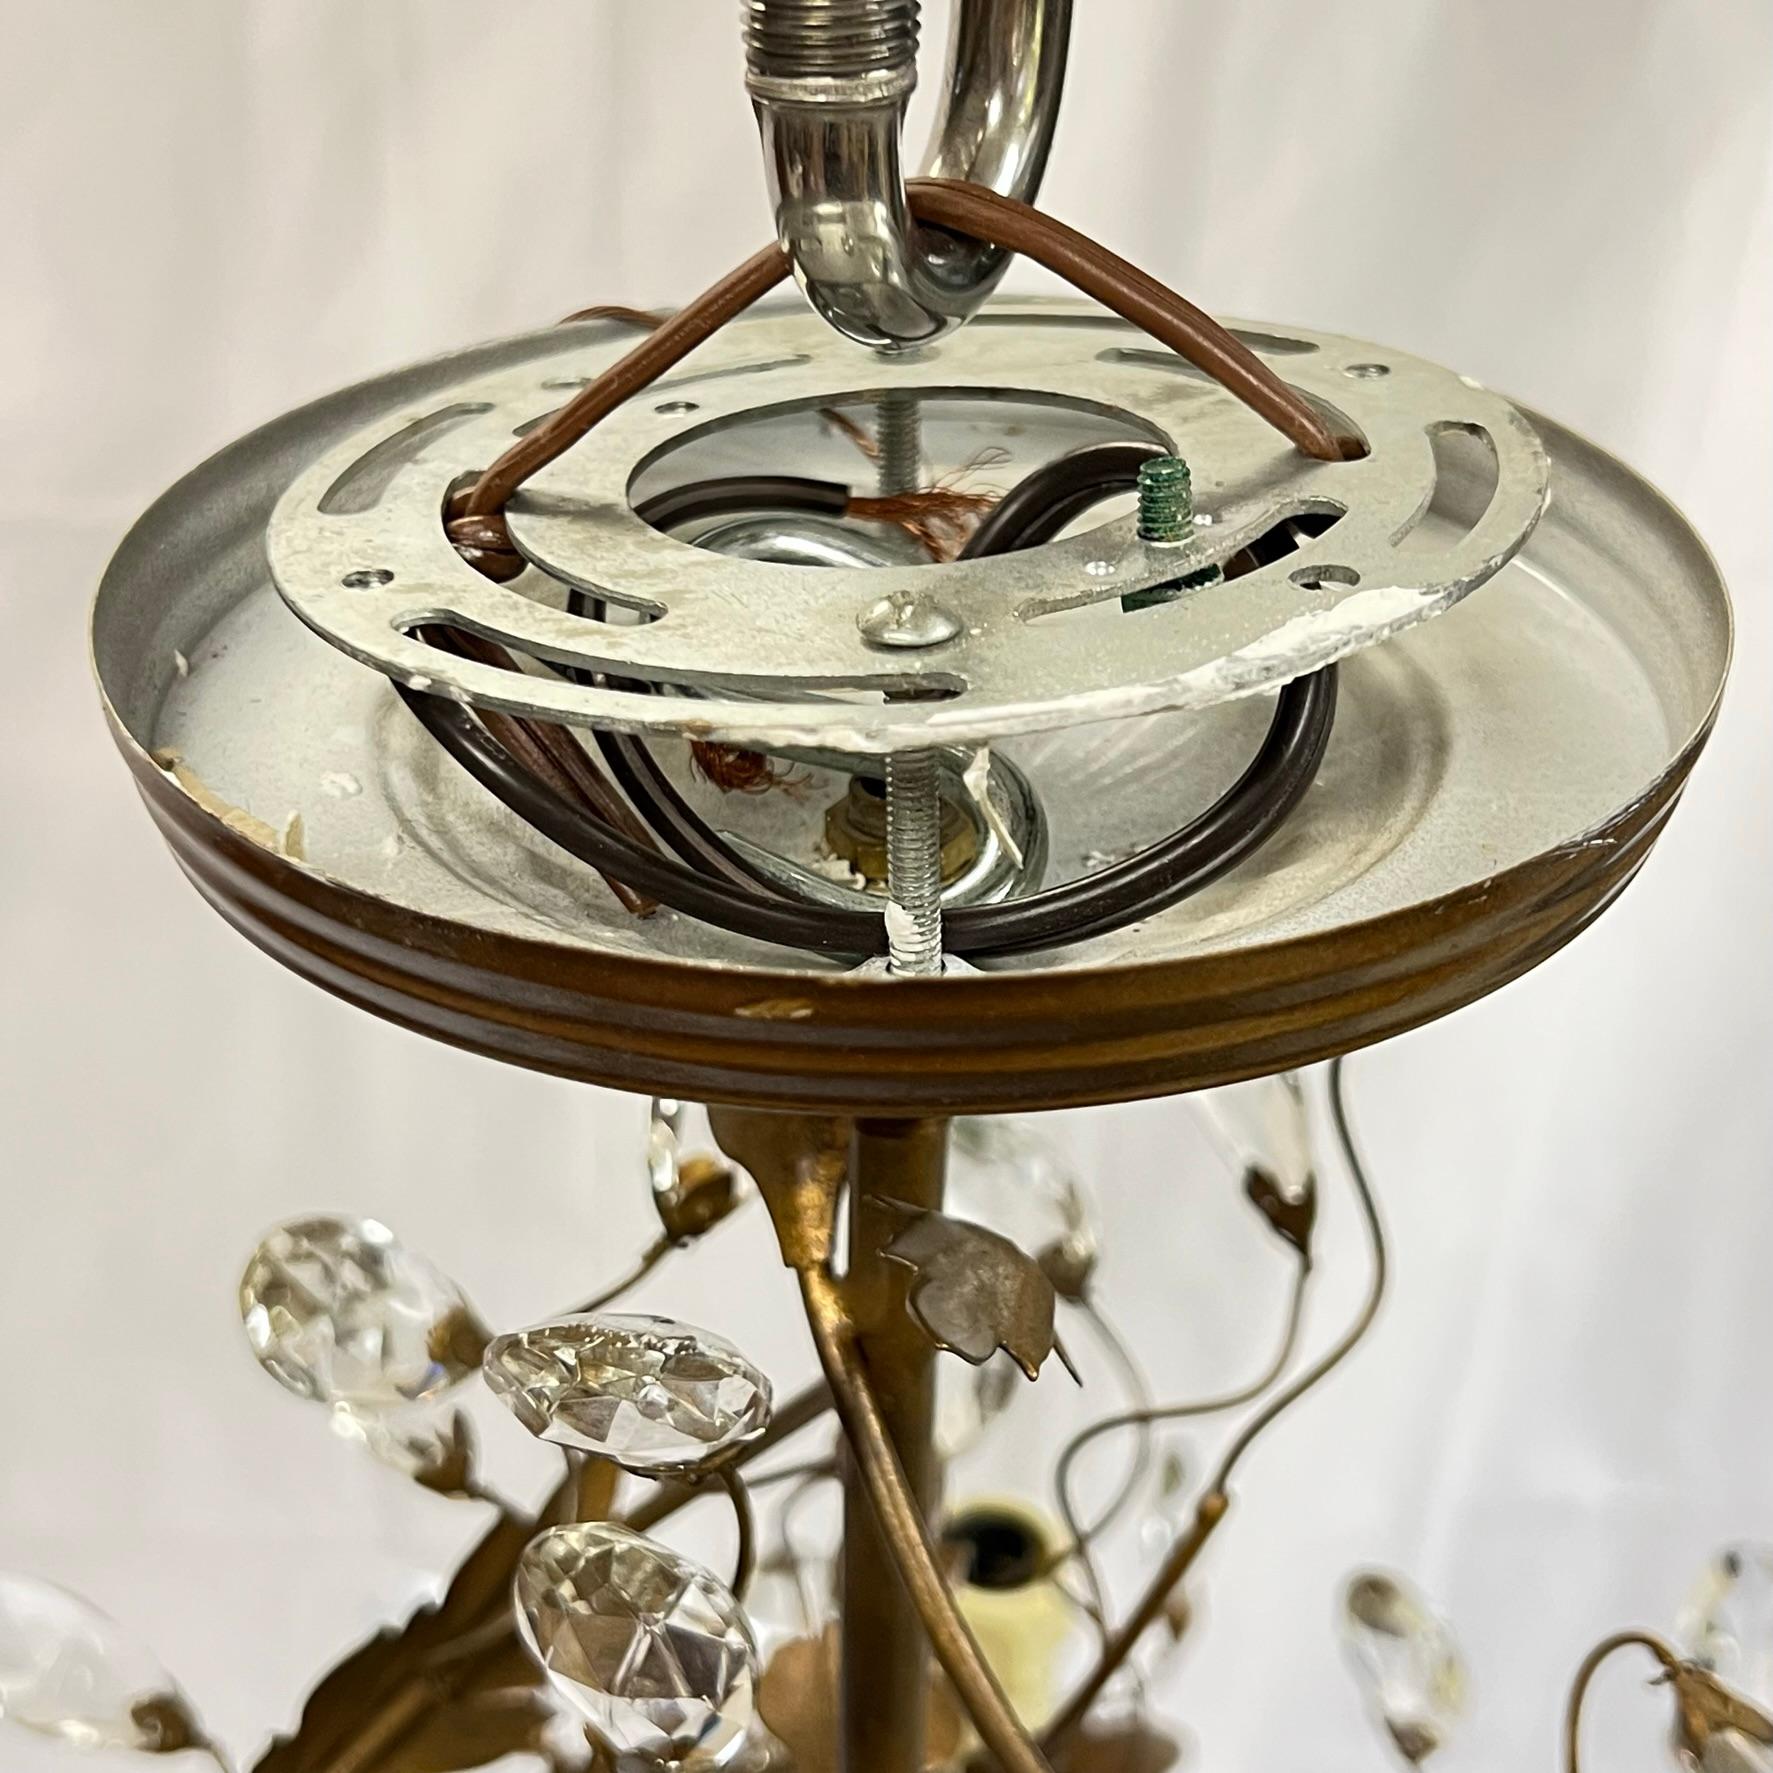 Pair of vintage patinated metal chandeliers in the Louis XV fashion with foliate design and faceted cut glass leaves and three sockets with faux candle covers. Ready for use.